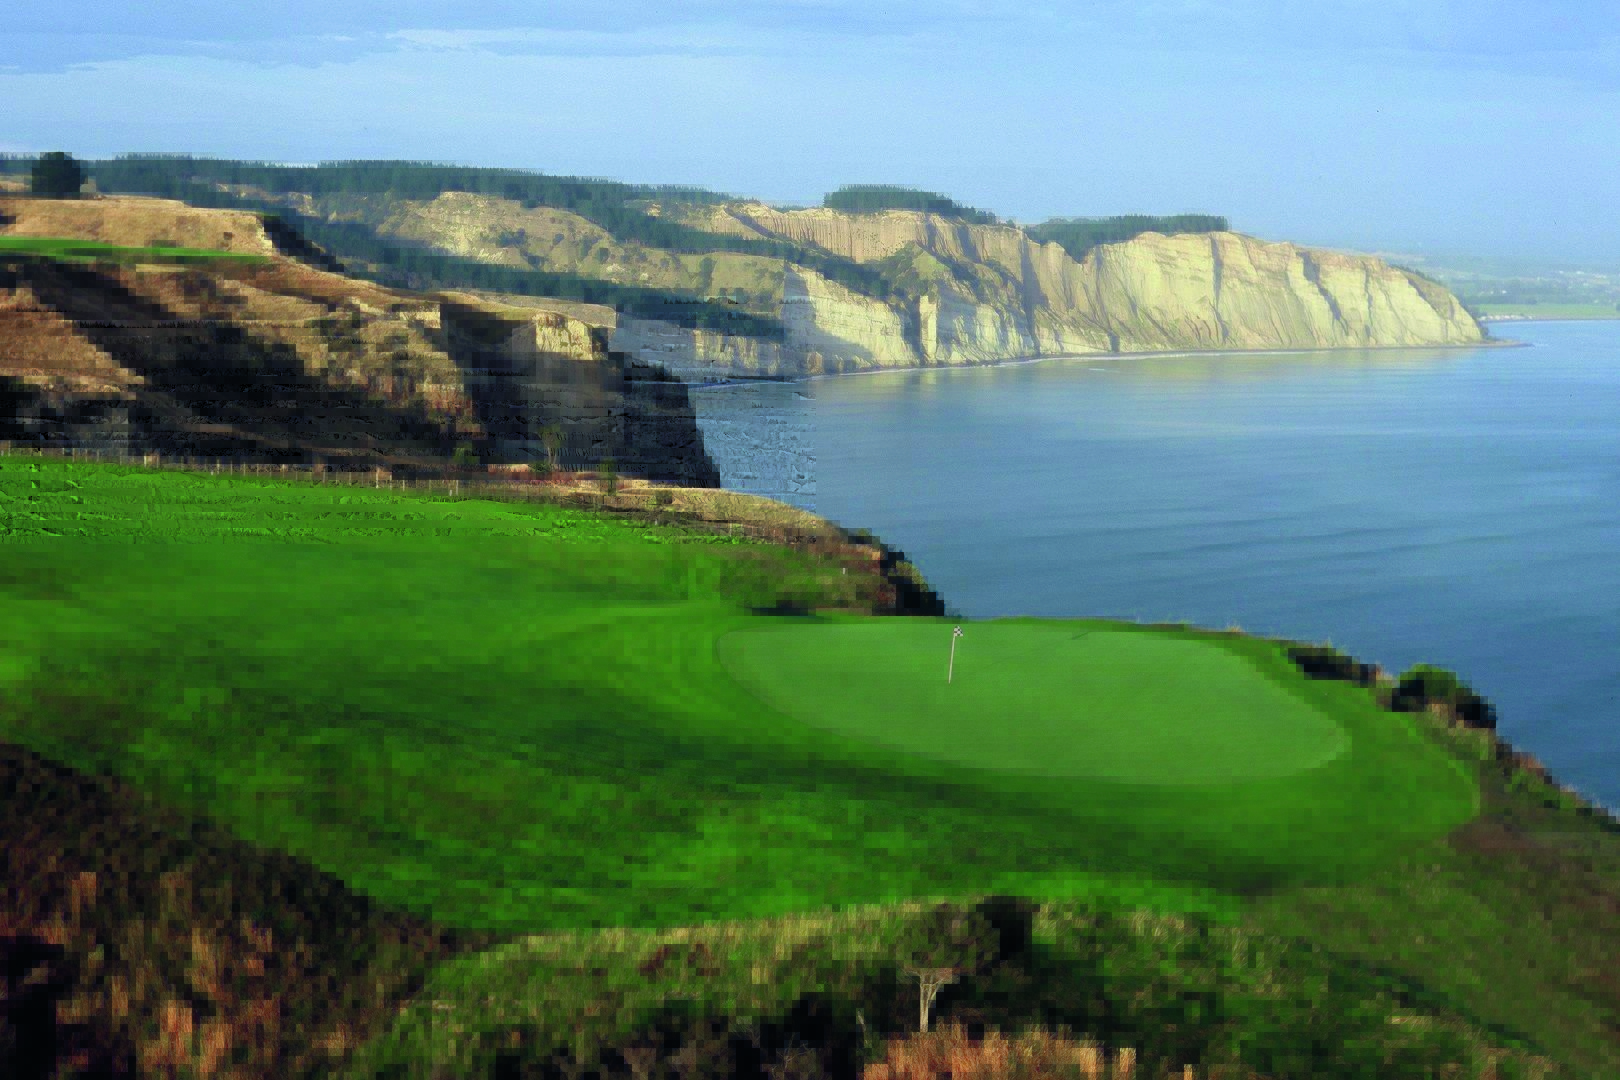 <strong>CAPE KIDNAPPERS</strong>, New Zealand. The back nine is built on top of precipitous “fingers” of land that stretch out some 460 feet above the sea.<br><br>Waldek says: "Designer Tom Doak set the back nine holes atop narrow slivers of land, between which are steep cliffs that drop 460 feet into Hawke’s Bay. This course is not for the faint of heart, although admittedly it appears far more intimidating from the air than it does from the fairways or greens."<br>